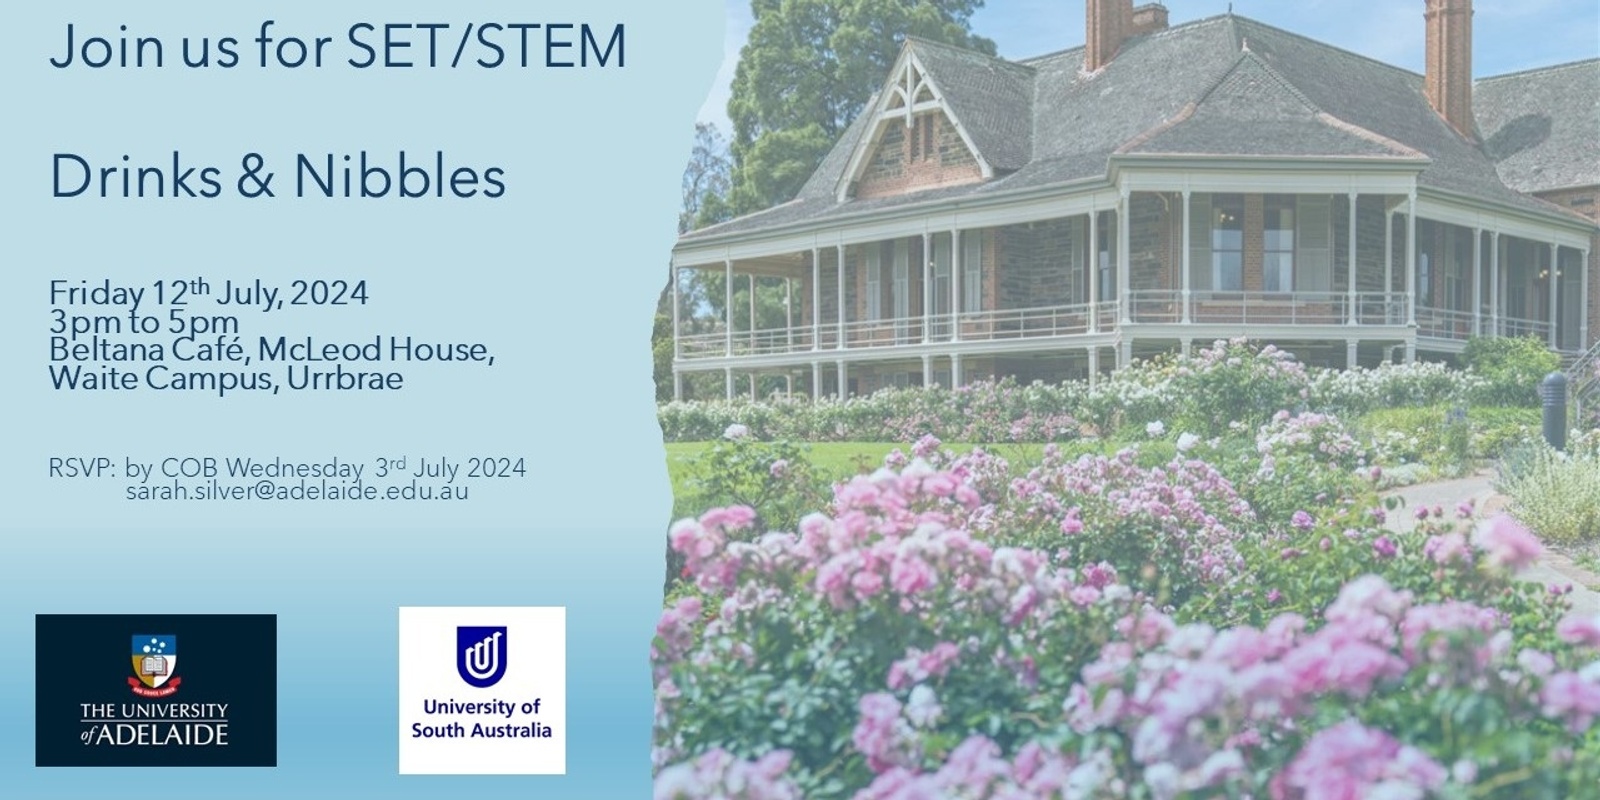 Banner image for SET/STEM Drinks and Nibbles